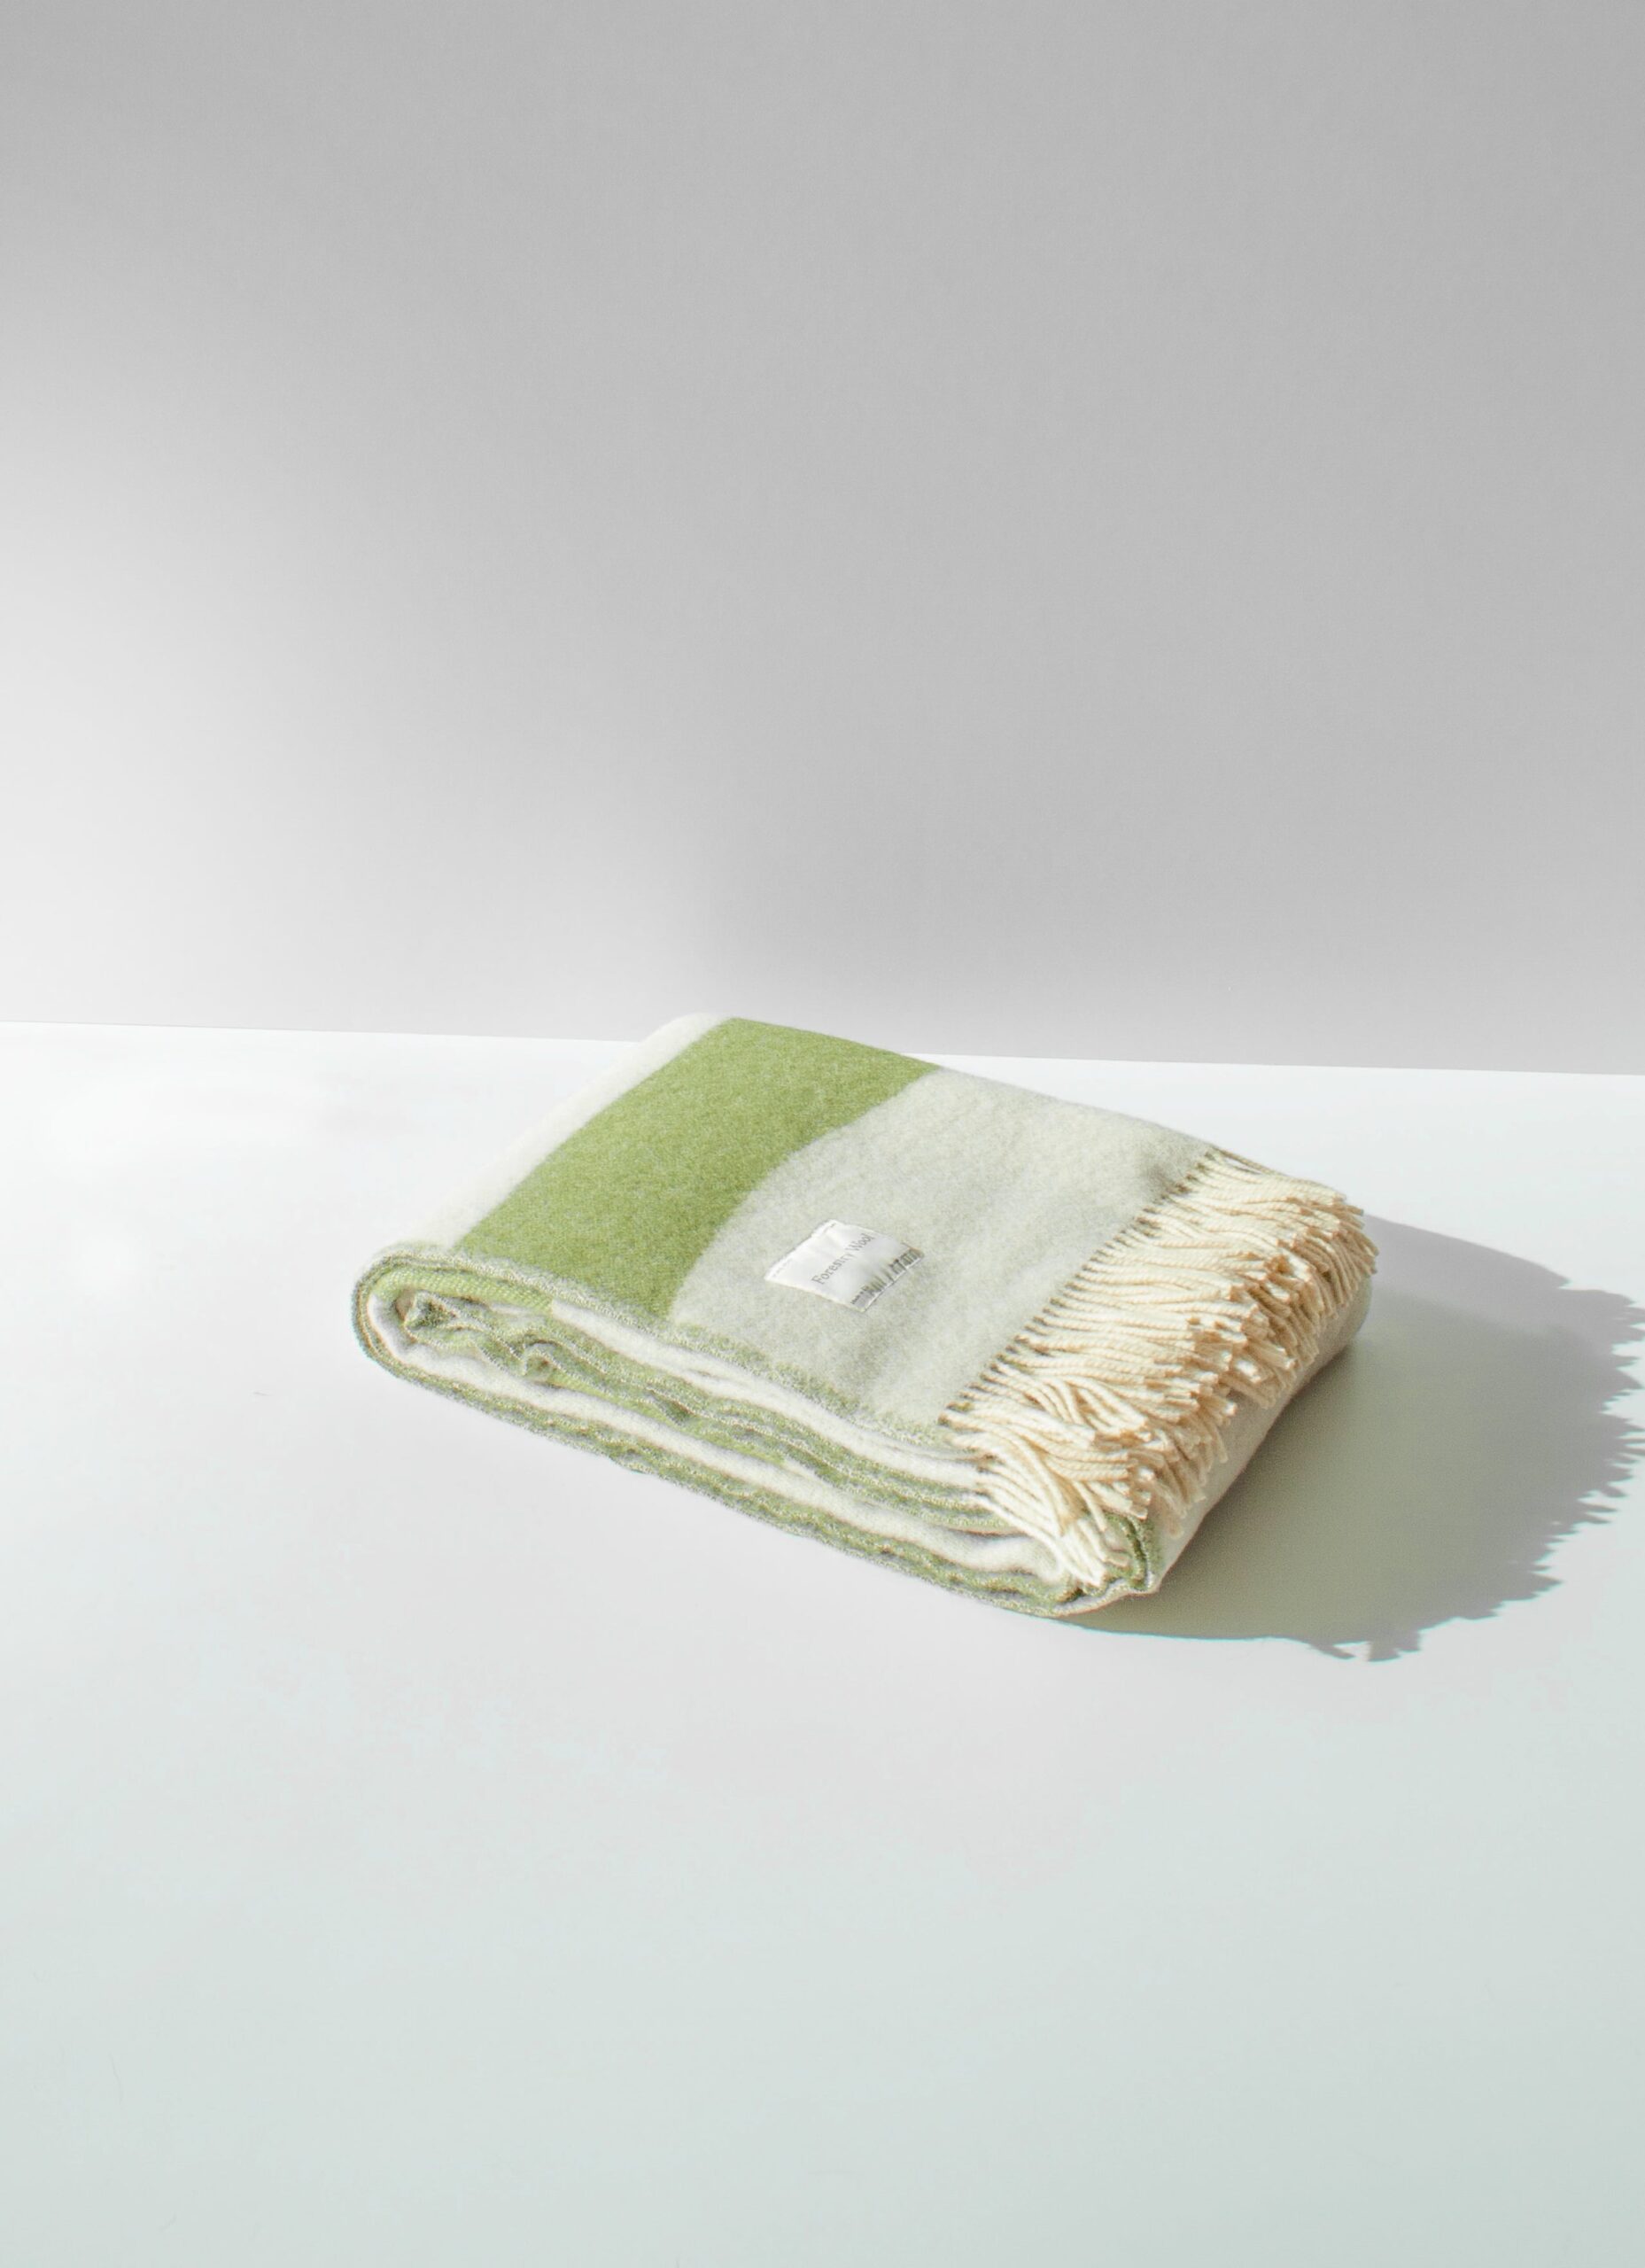 Forestry Wool - New Zealand Wool Blanket - Nature Green and Beige